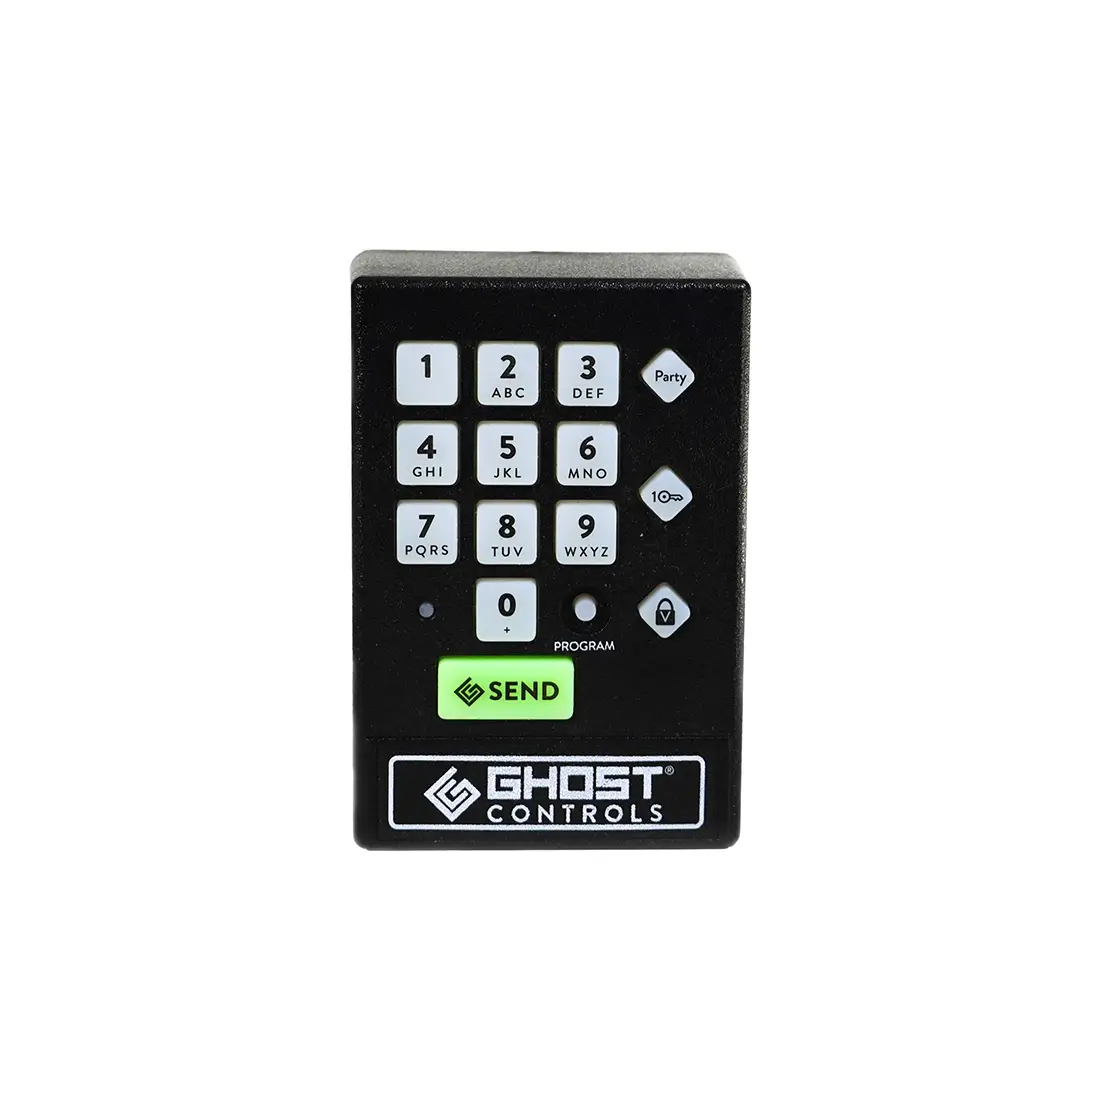 Can this keypad be operated through my cellphone?